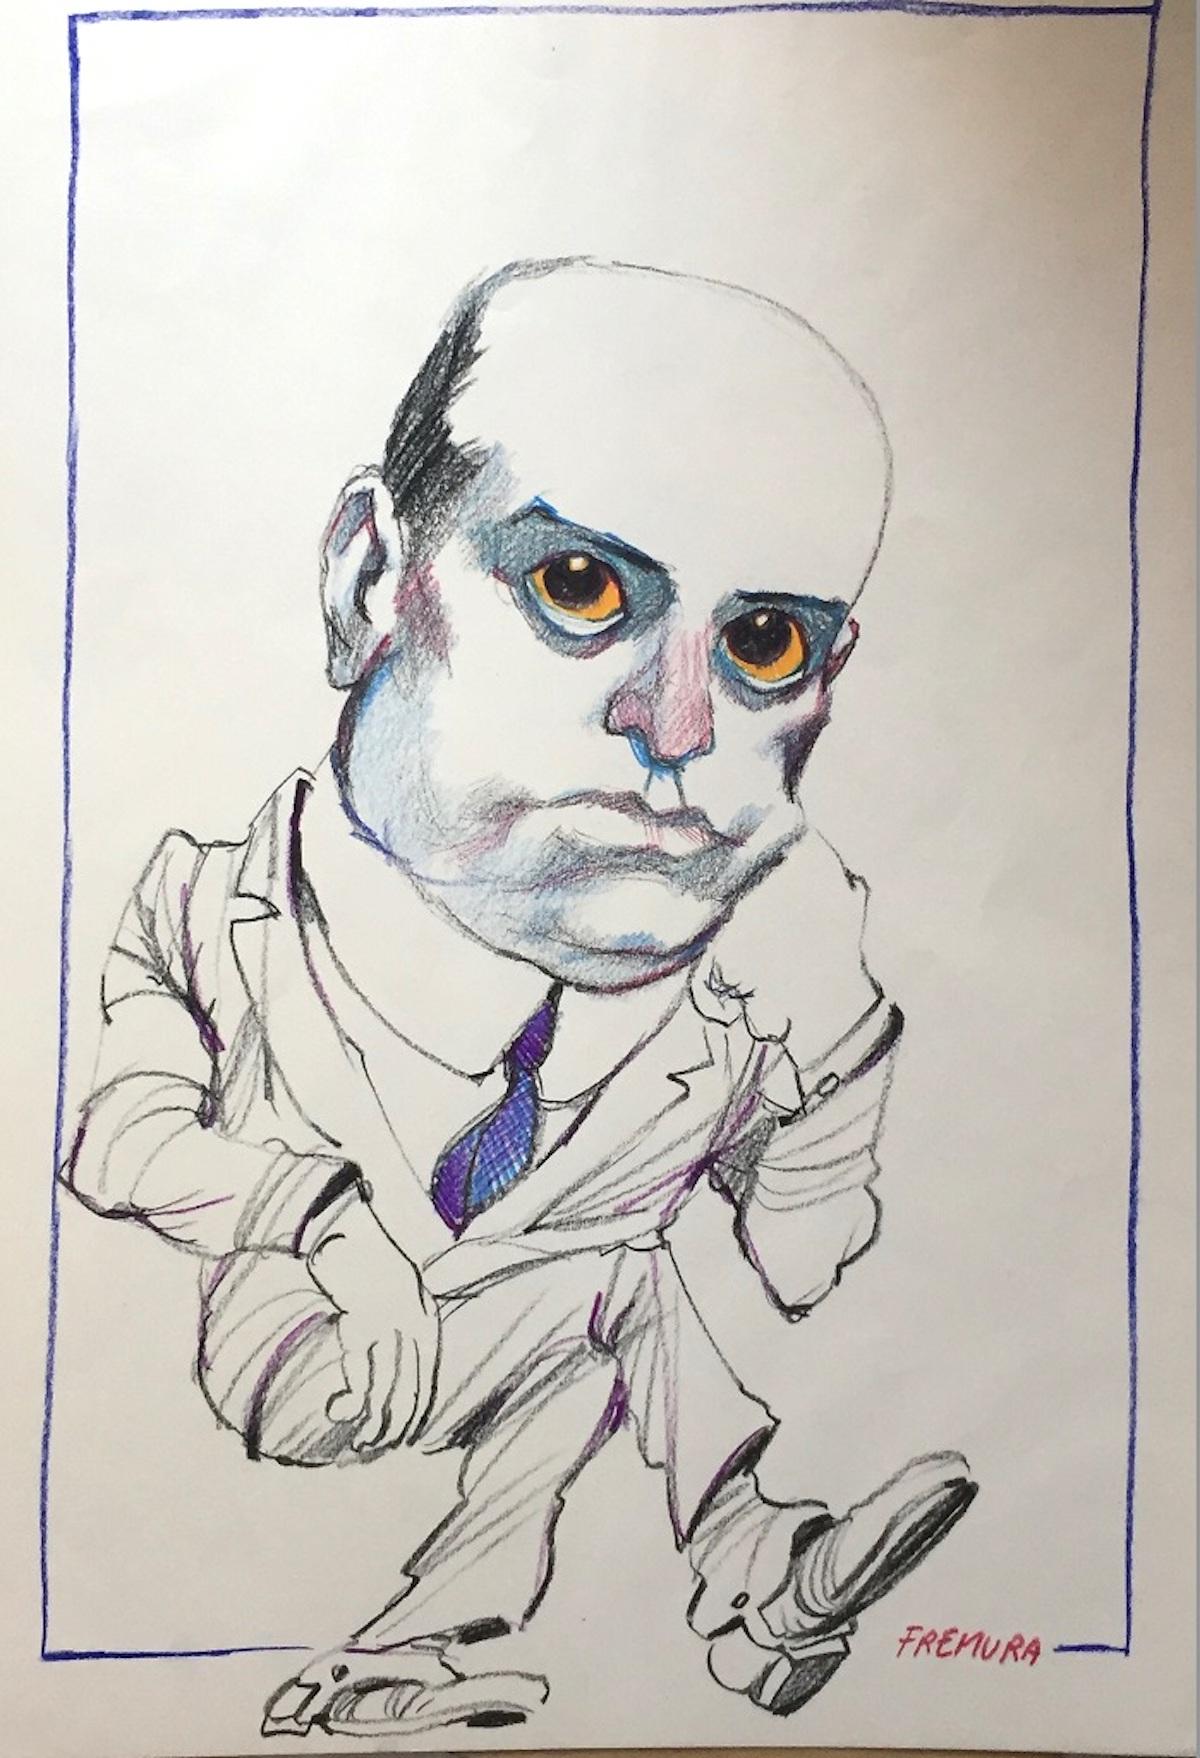 Satyrical Portrait of Benito Mussolini - Pencil and Pastel on Paper - 1975